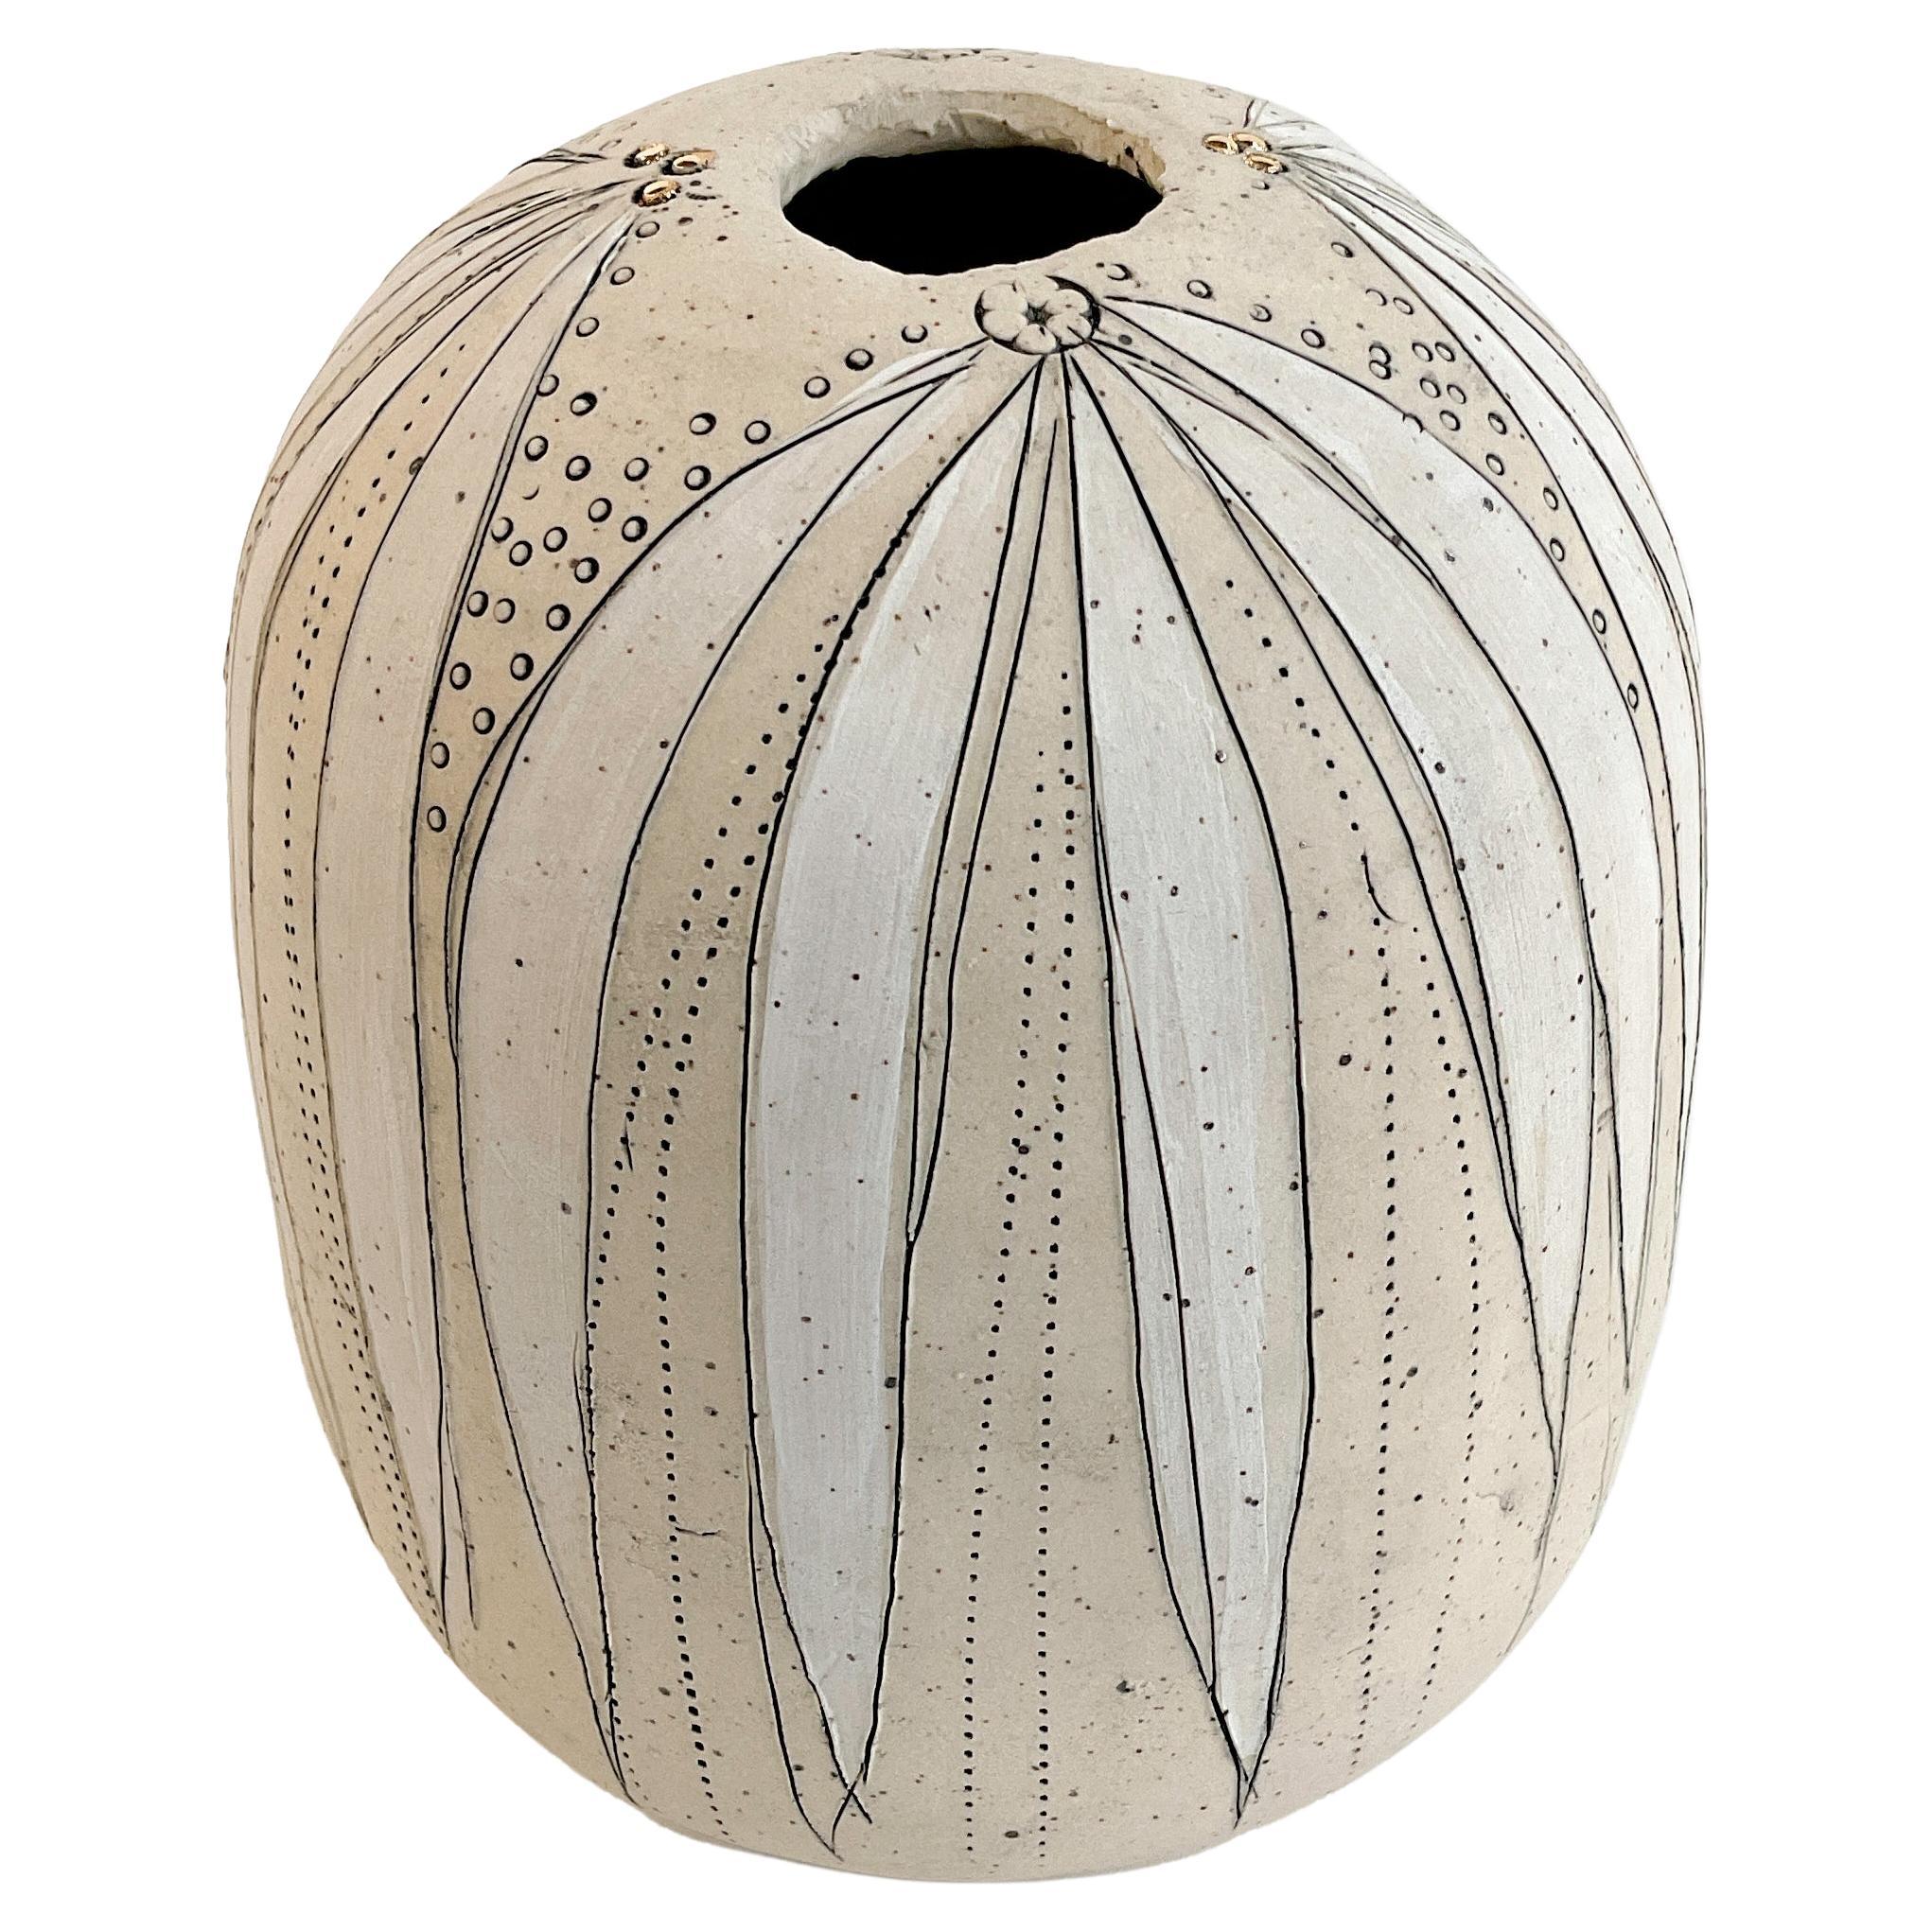 475-G Handcrafted Stoneware Budding Vase with Gold Detail by Helen Prior For Sale